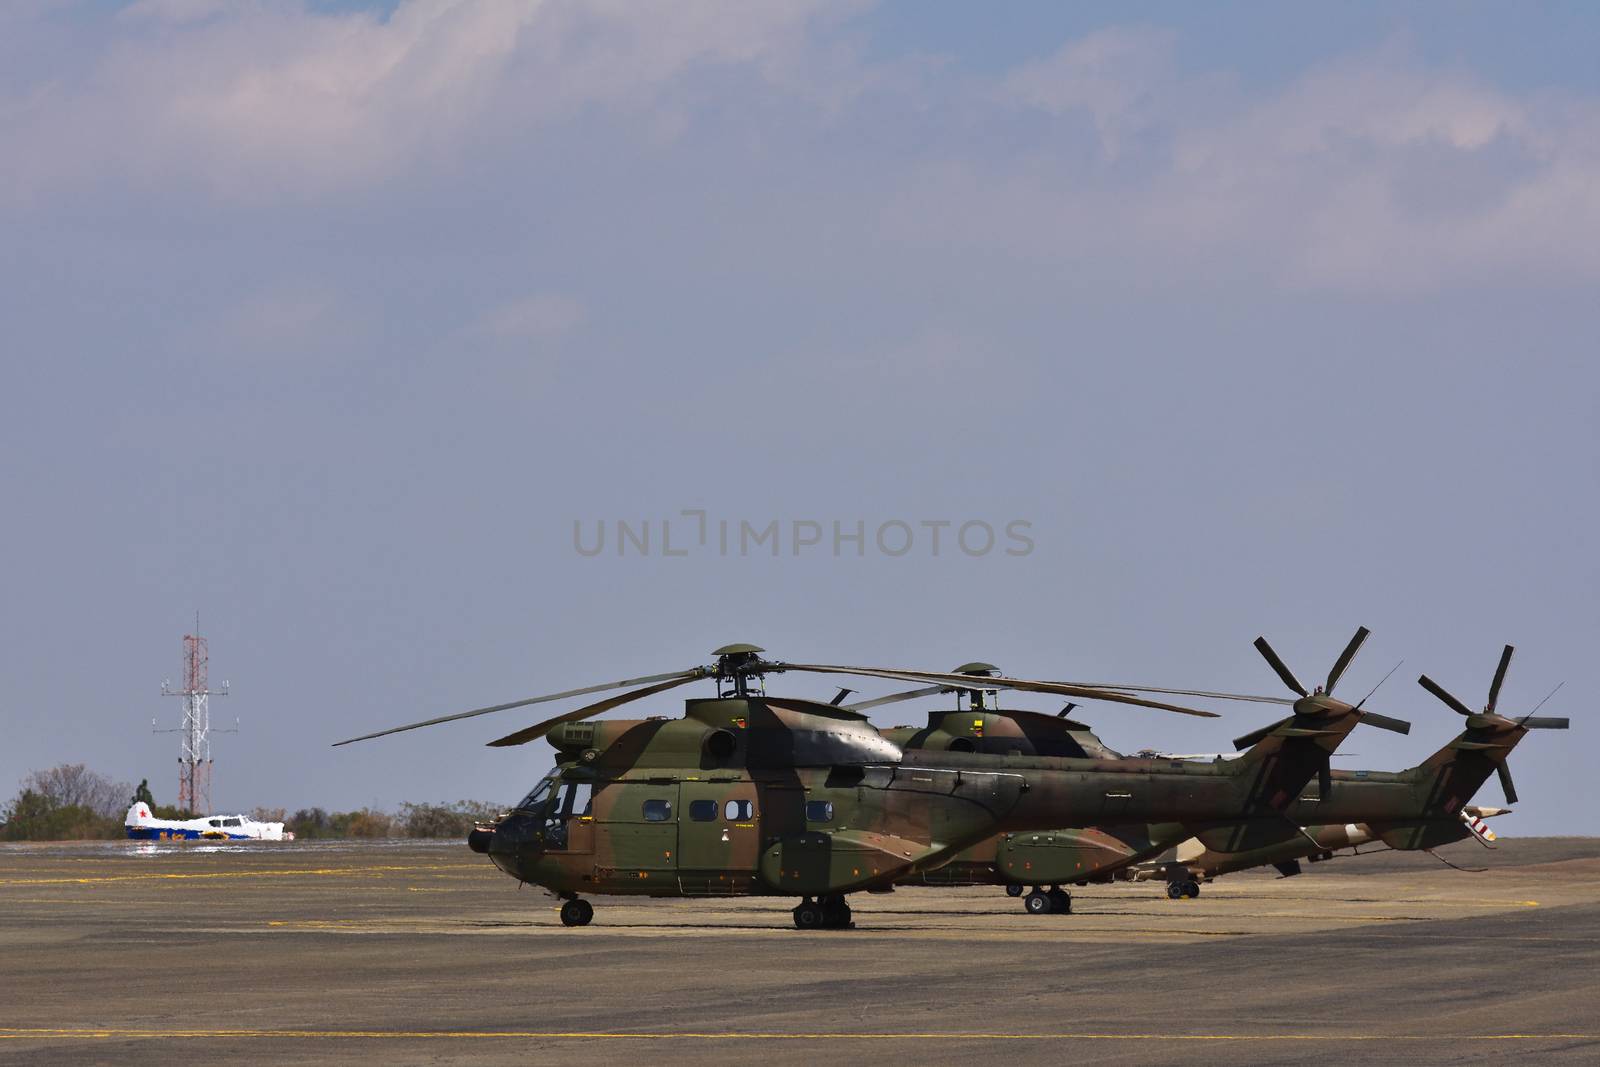 Military Atlas Oryx Helicopters Parked On Airfield by jjvanginkel